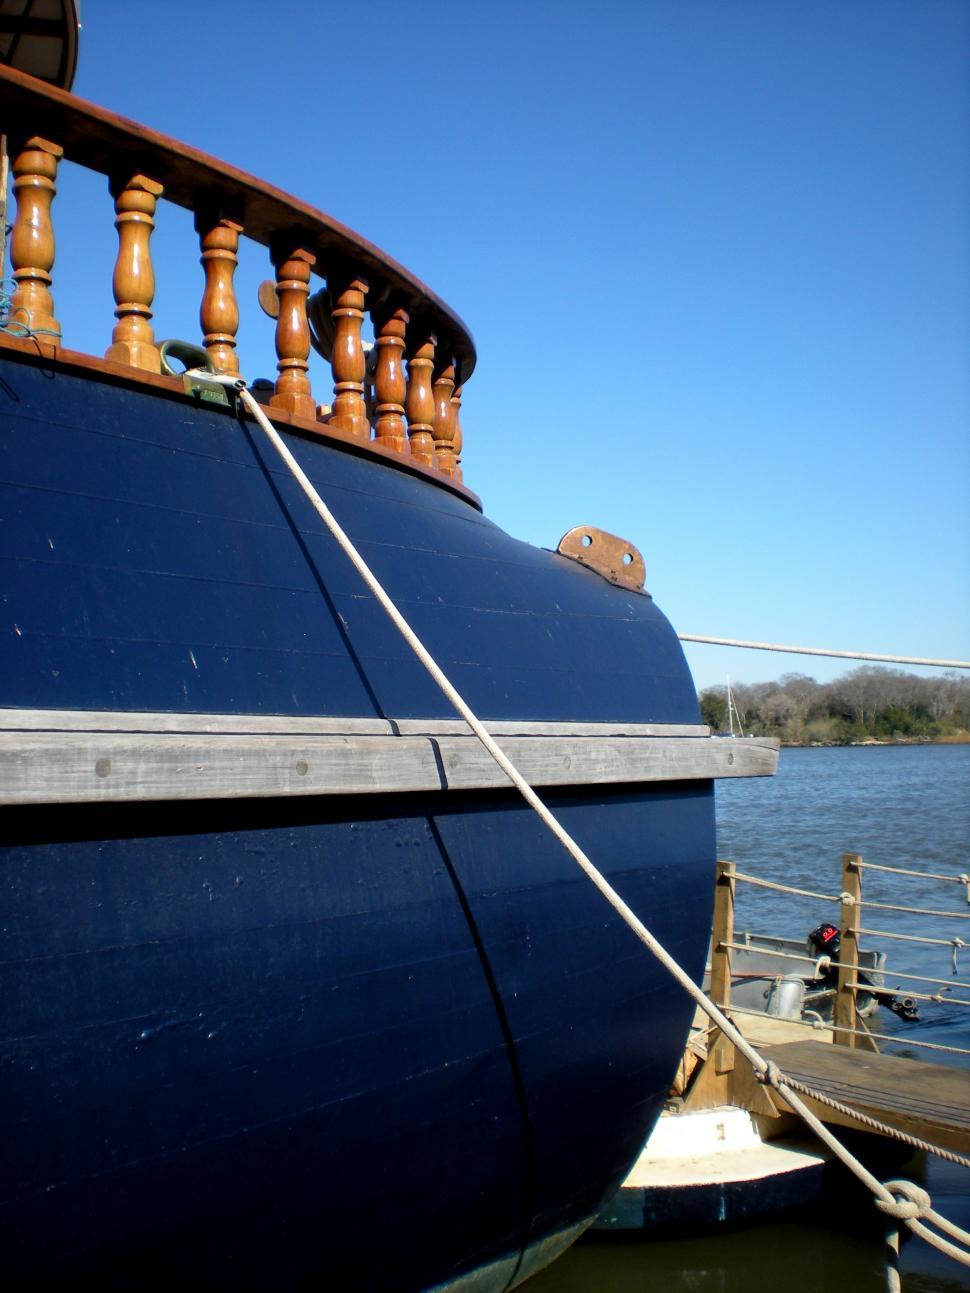 Free Image of Large Blue Boat Tied Up to Dock 